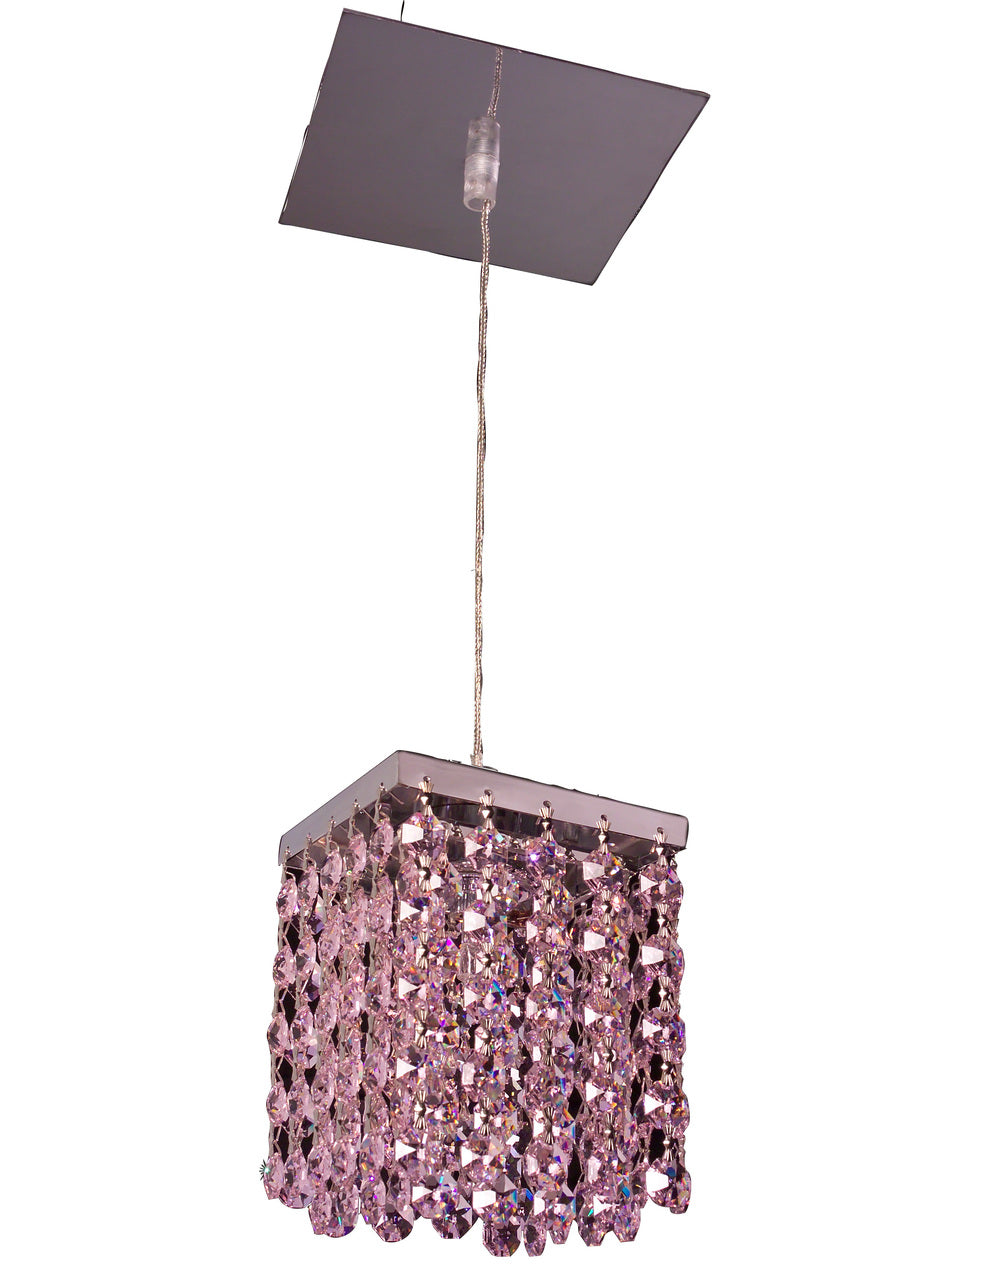 Classic Lighting 16101 SRO-S Bedazzle Crystal Pendant in Chrome